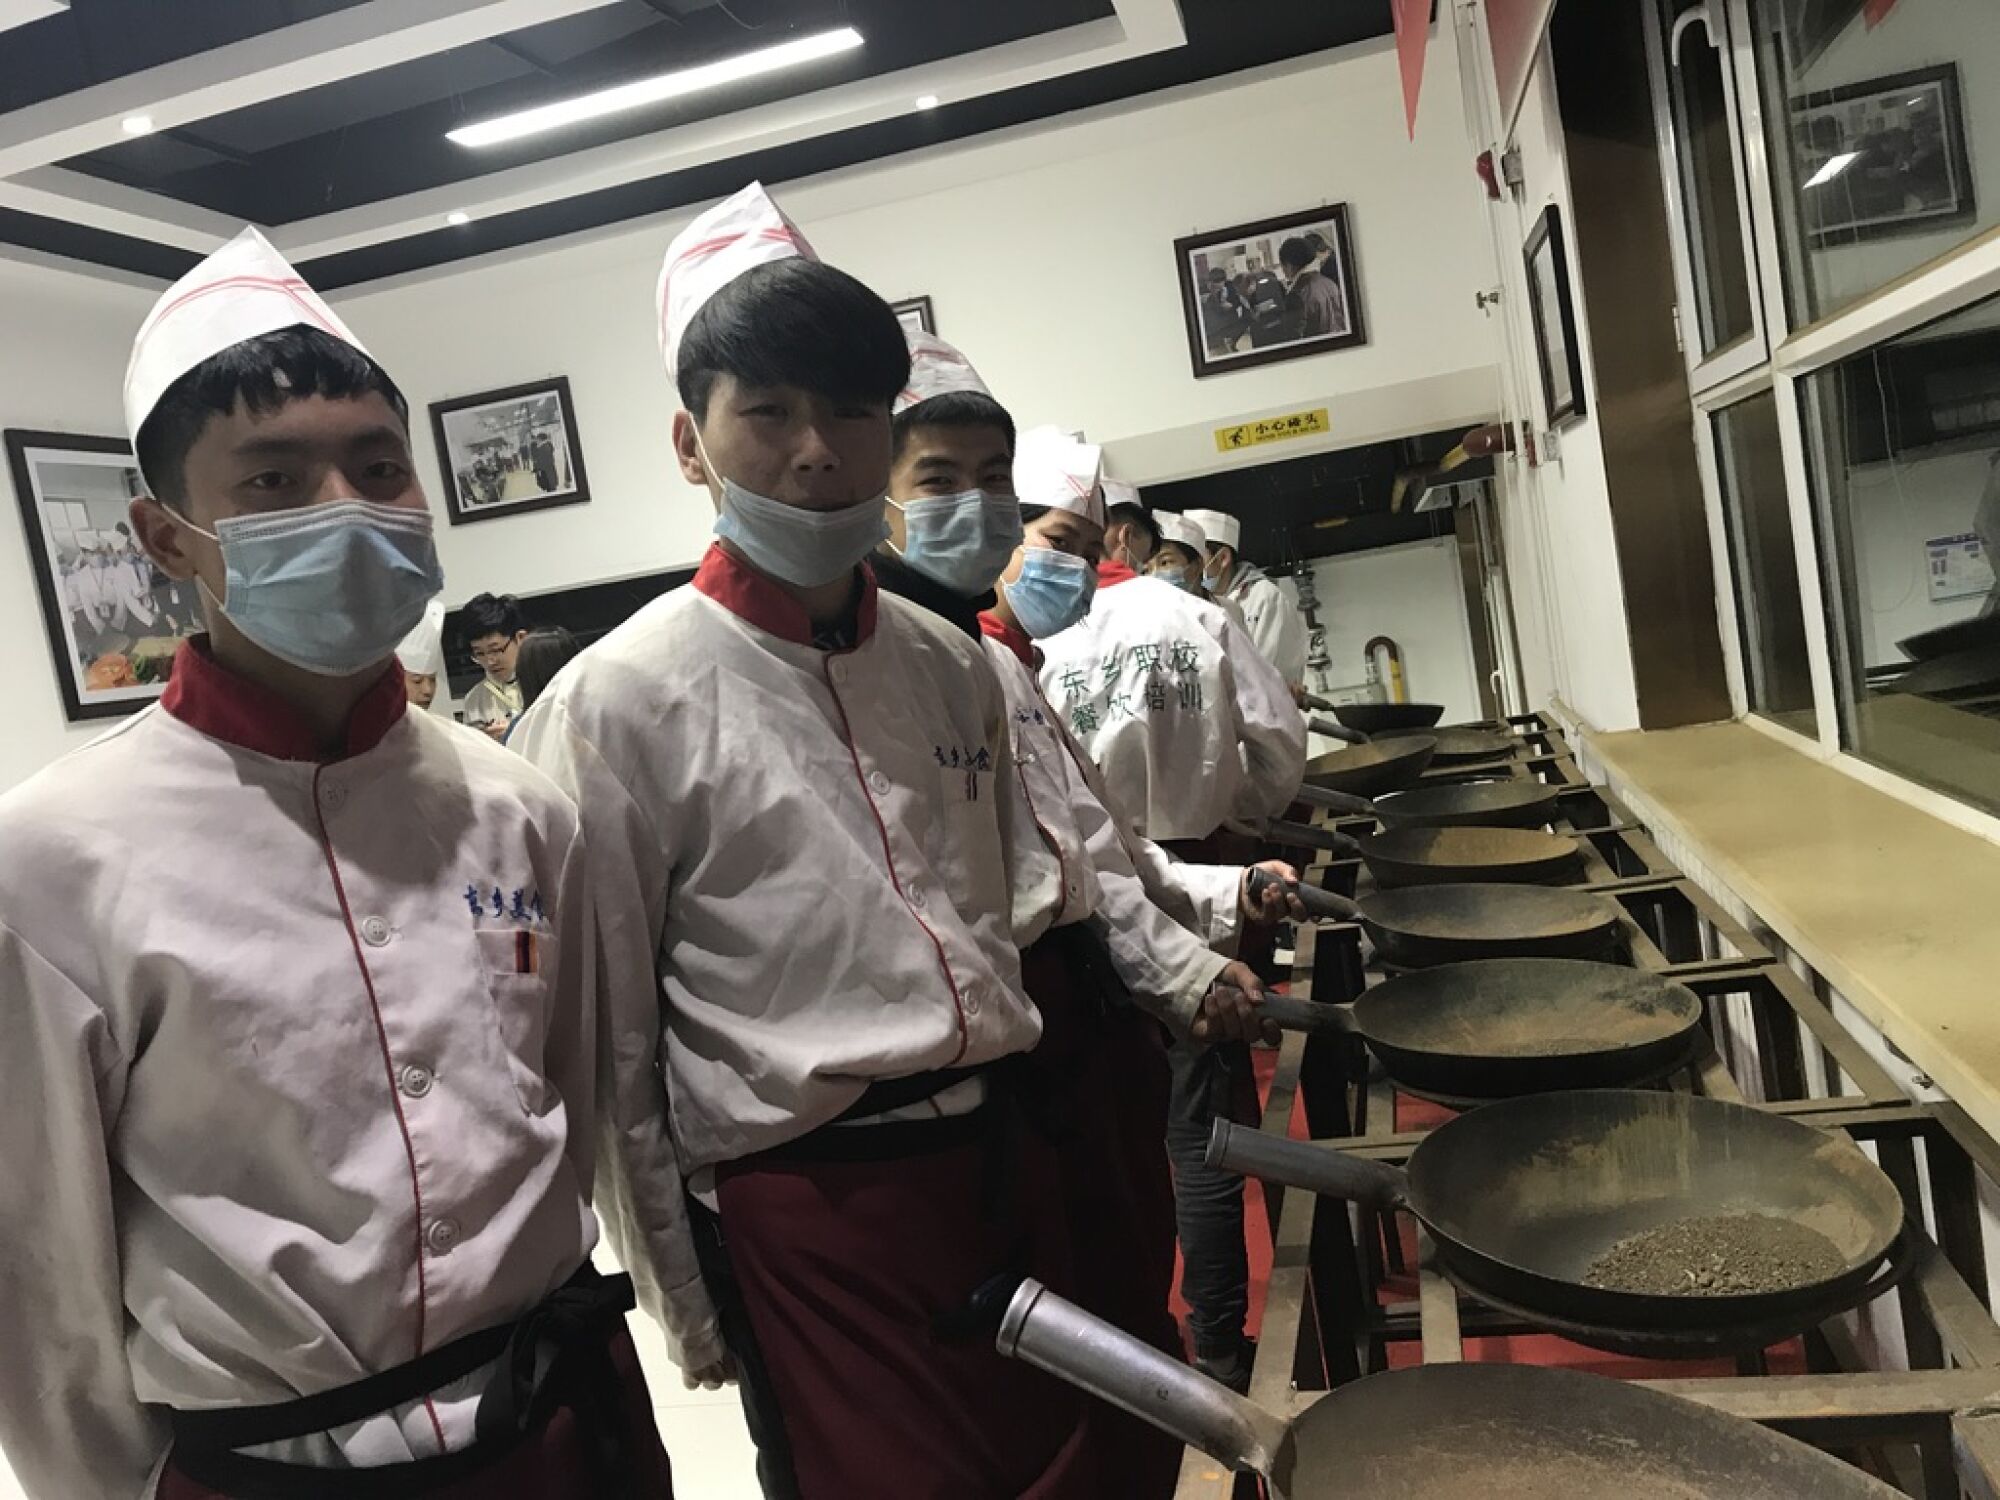 Dongxiang teenagers practice flipping woks at a vocational school near Linxia.